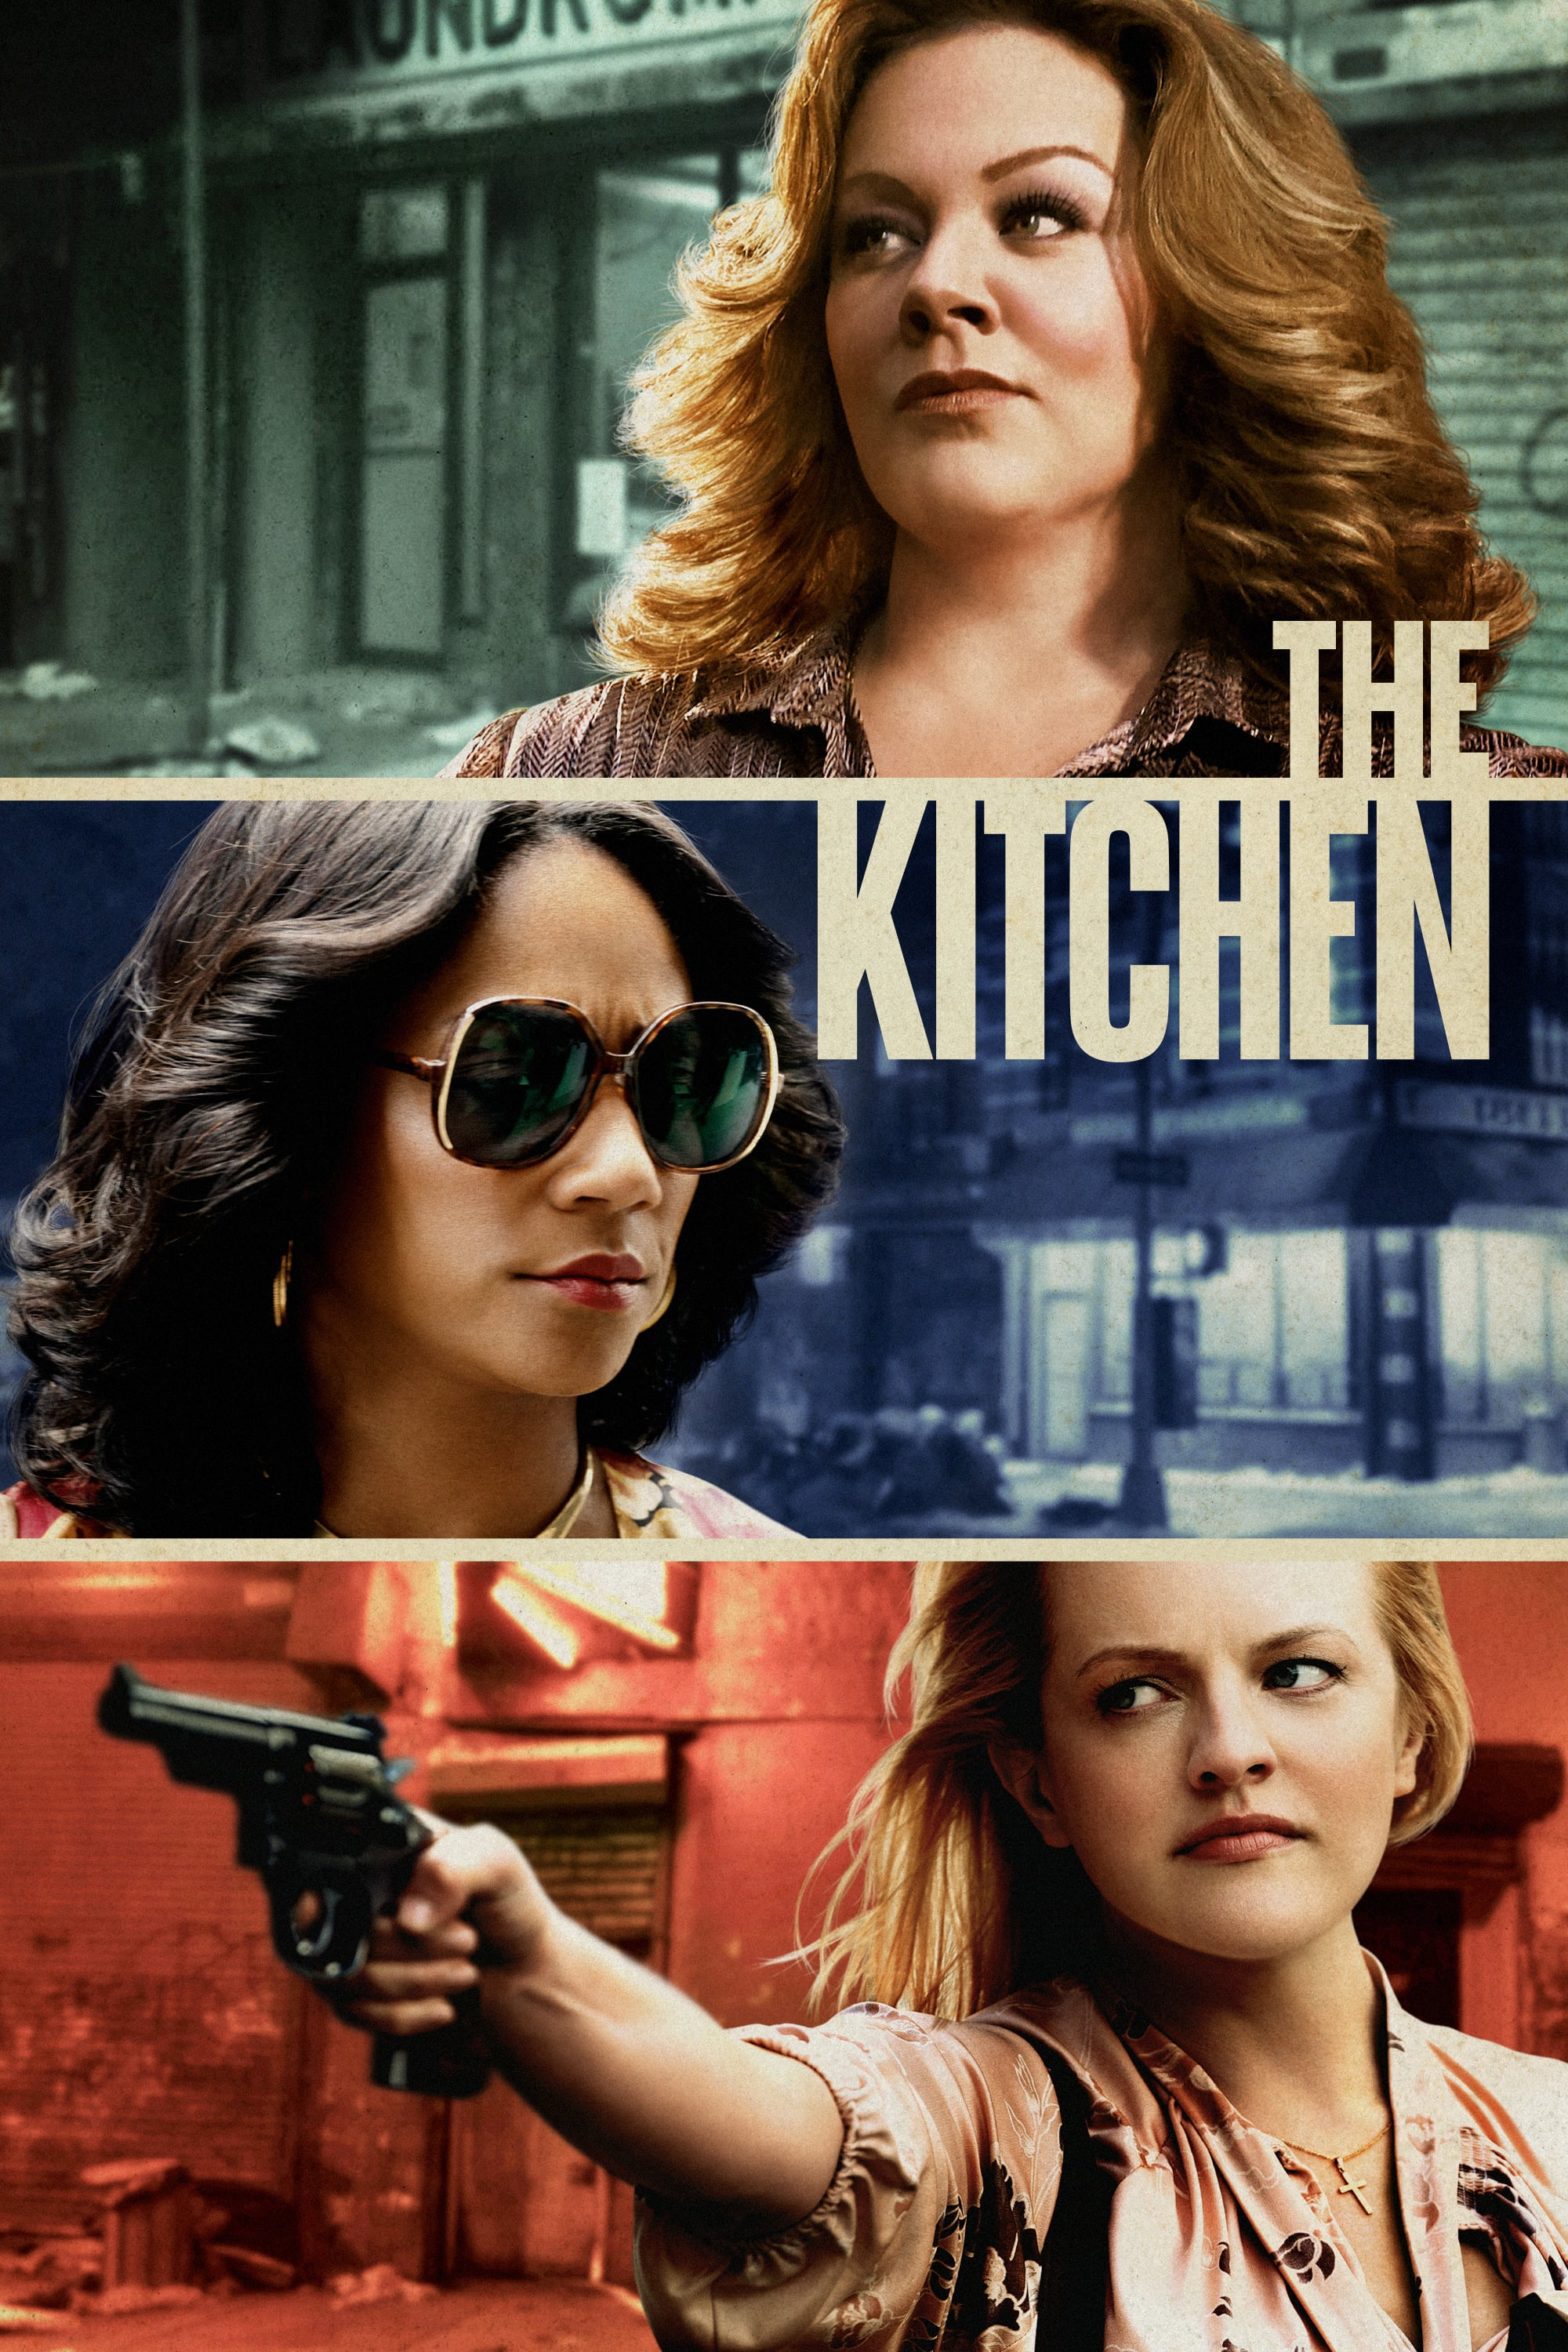 Poster for the movie "The Kitchen"